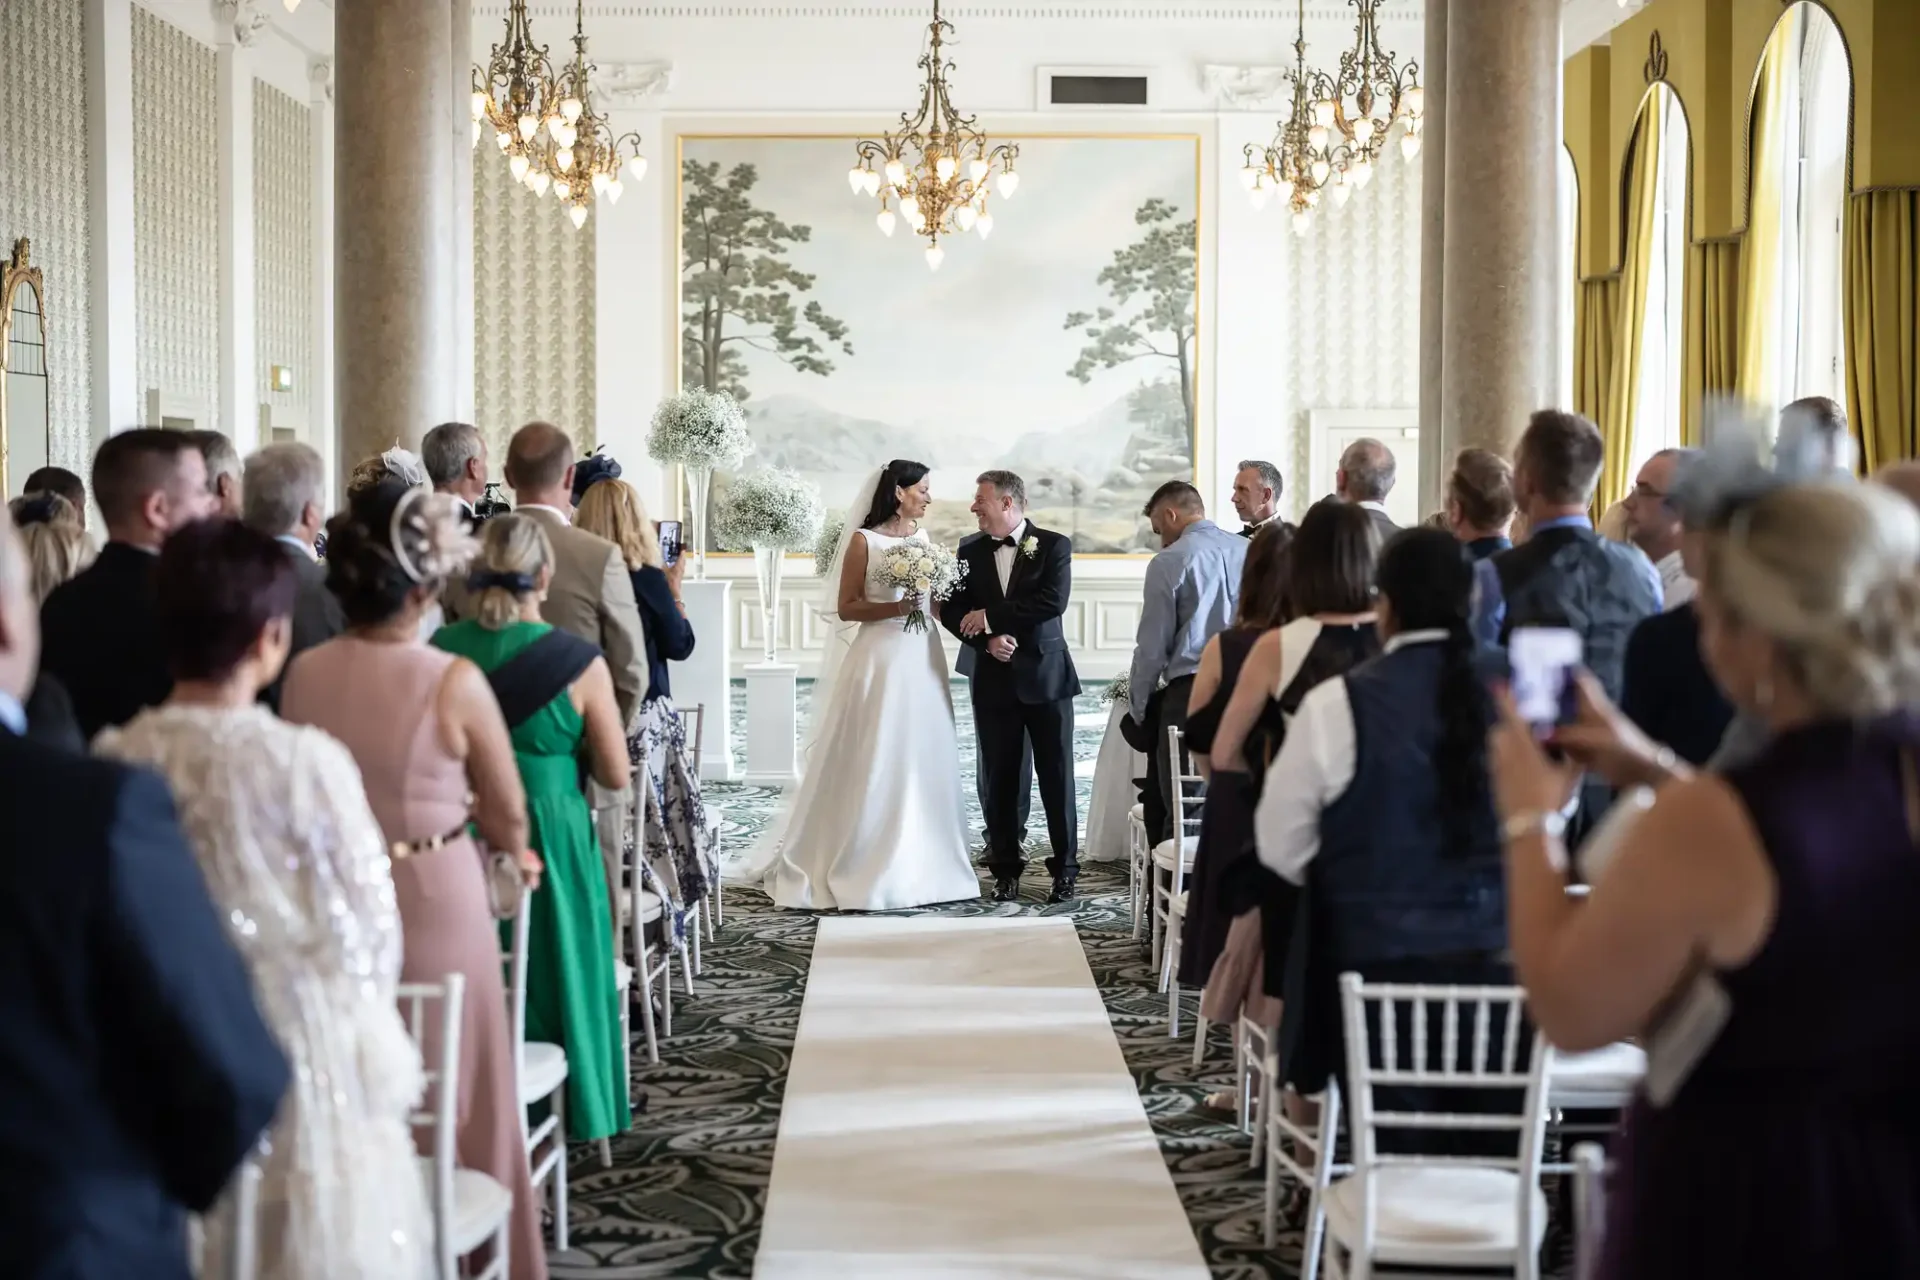 A bride and groom exchanging vows at the front of an elegant room, surrounded by guests seated and standing, with ornate decor and large scenic murals on the walls.